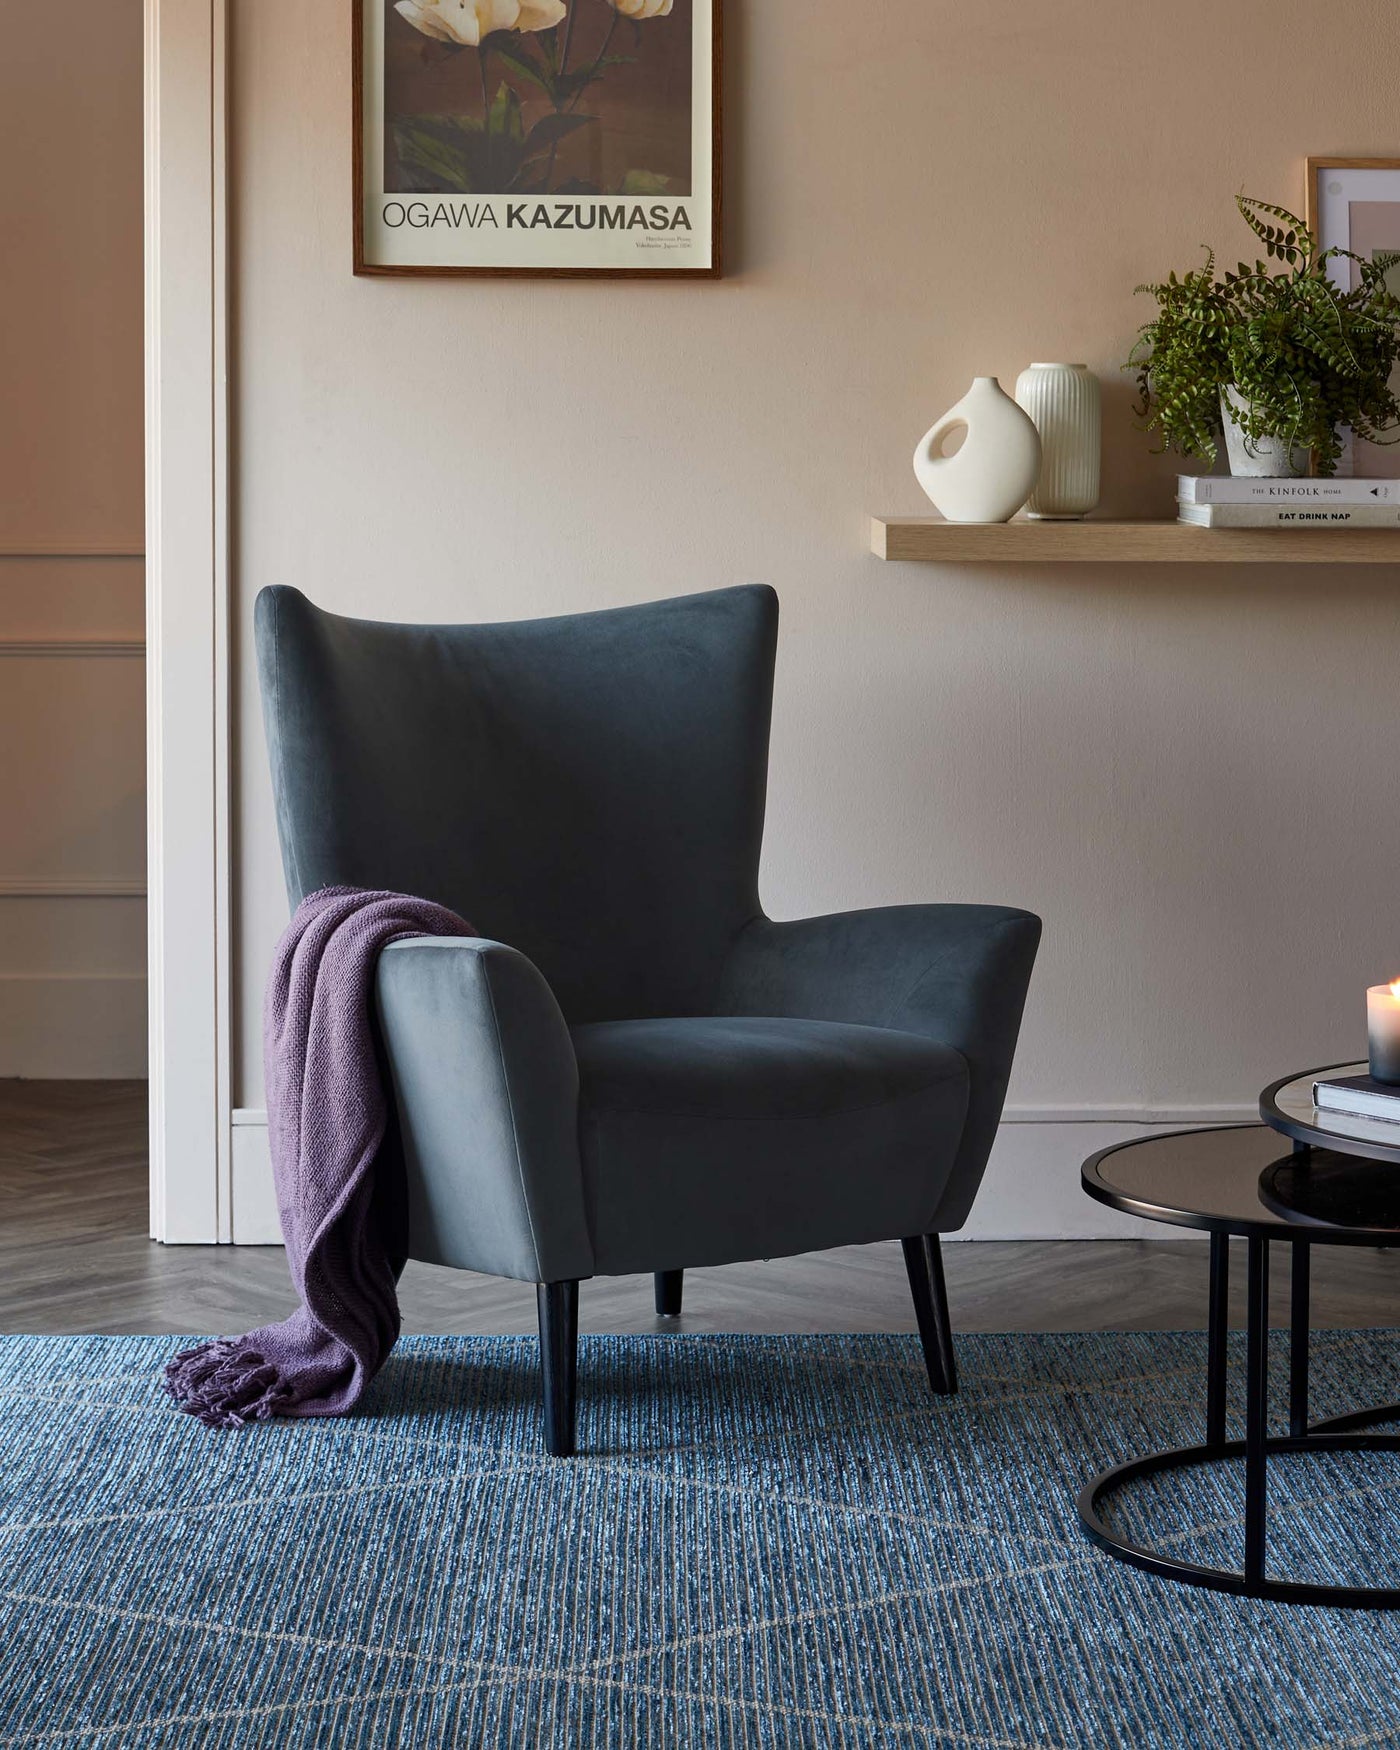 Modern charcoal grey wingback chair with tapered black legs, paired with a small, round, black side table on a textured blue area rug. There's a plum-coloured throw casually draped over one arm of the chair.